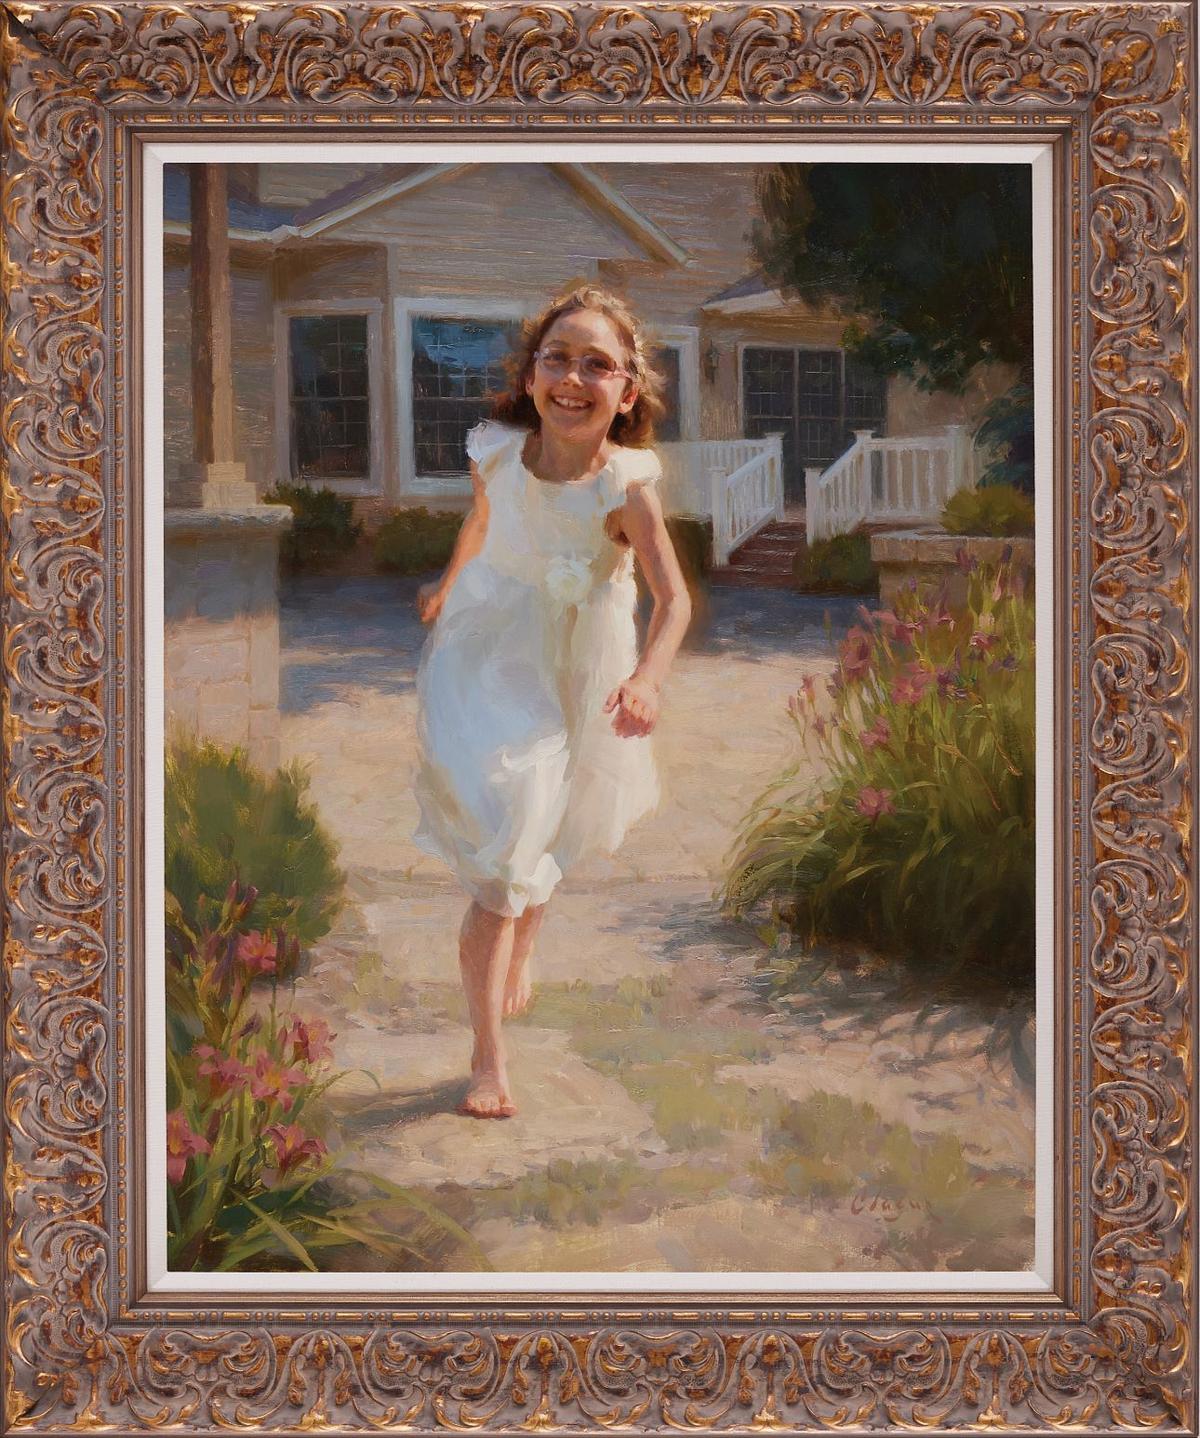 The bronze award-winning work “Jenna’s Joy” by Adam Clague of the United States. Oil on Canvas; 30 inches by 24 inches. (NTD International Figure Painting Competition)